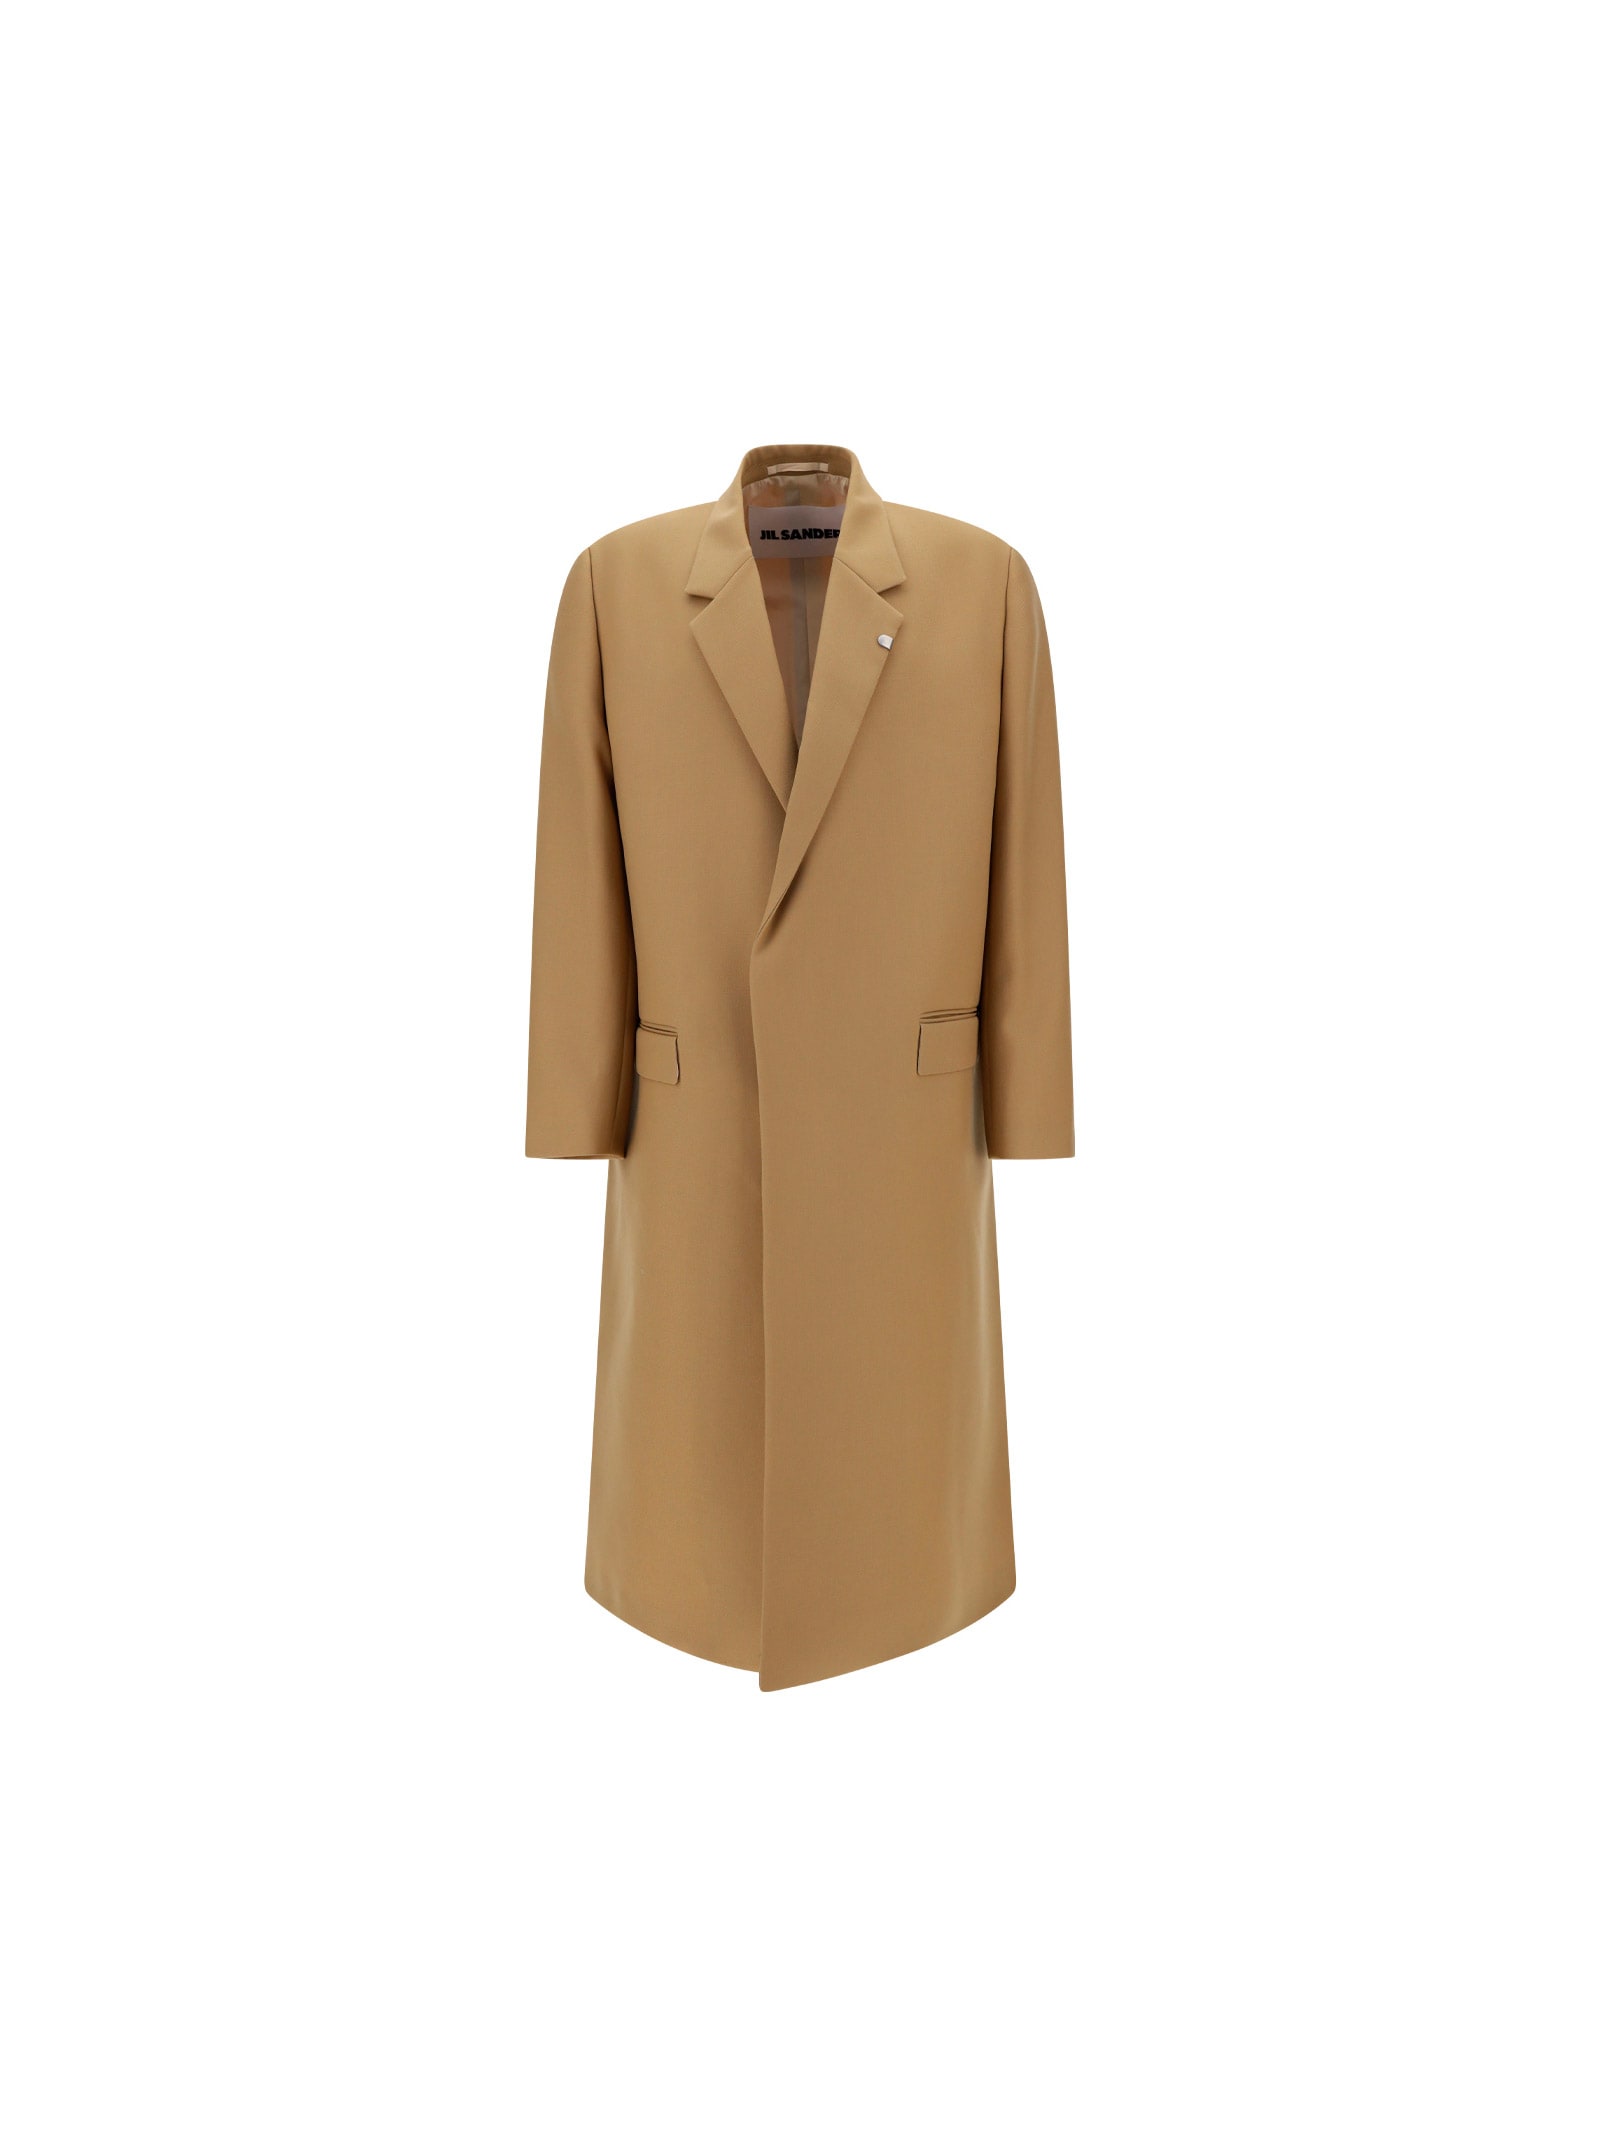 Mens Clothing Coats Raincoats and trench coats Jil Sander Cotton Double-breasted Trench Coat in Natural for Men 